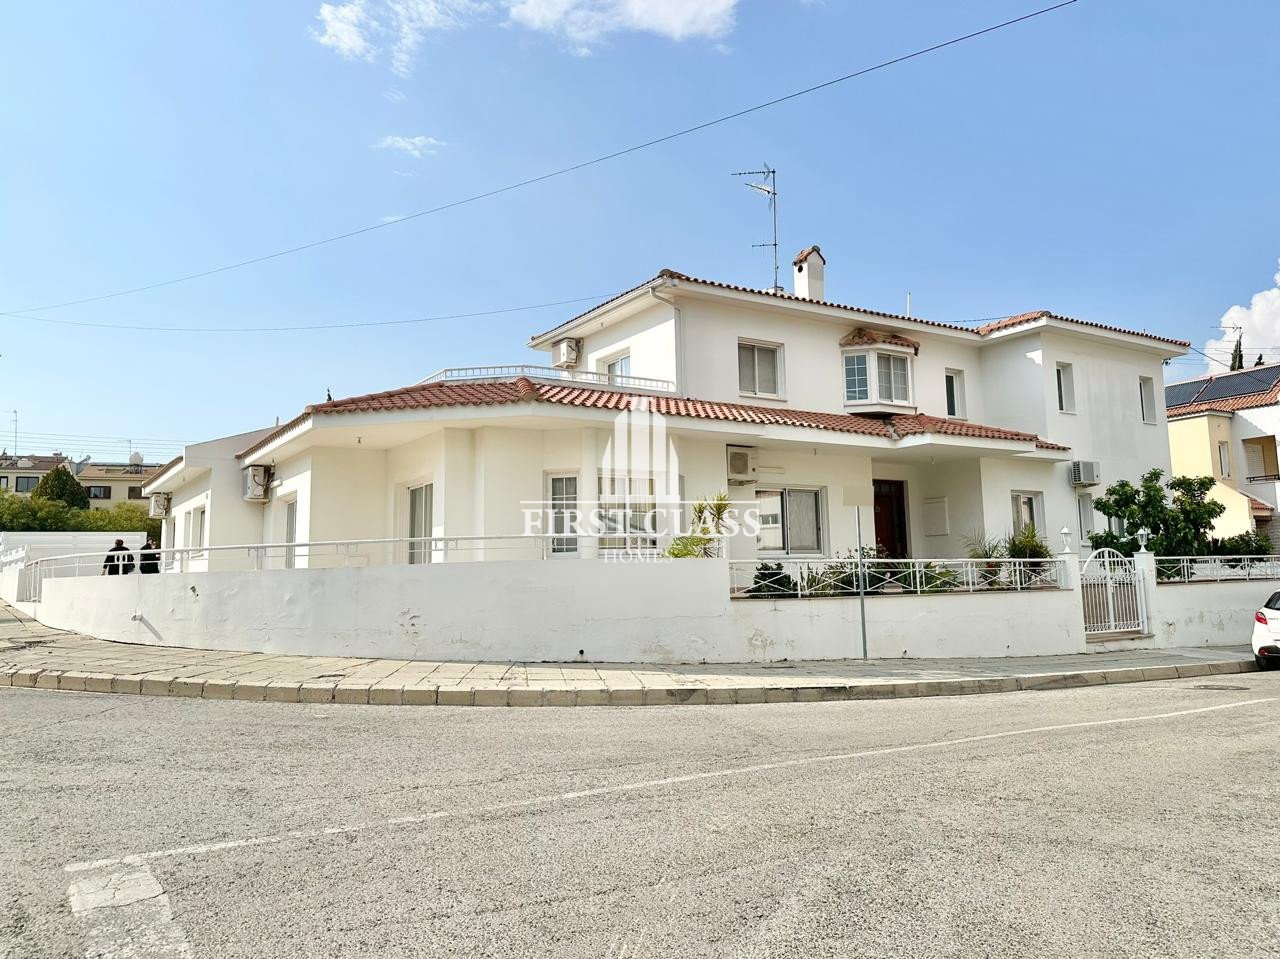 Property for Rent: House (Detached) in Archangelos, Nicosia for Rent | Key Realtor Cyprus